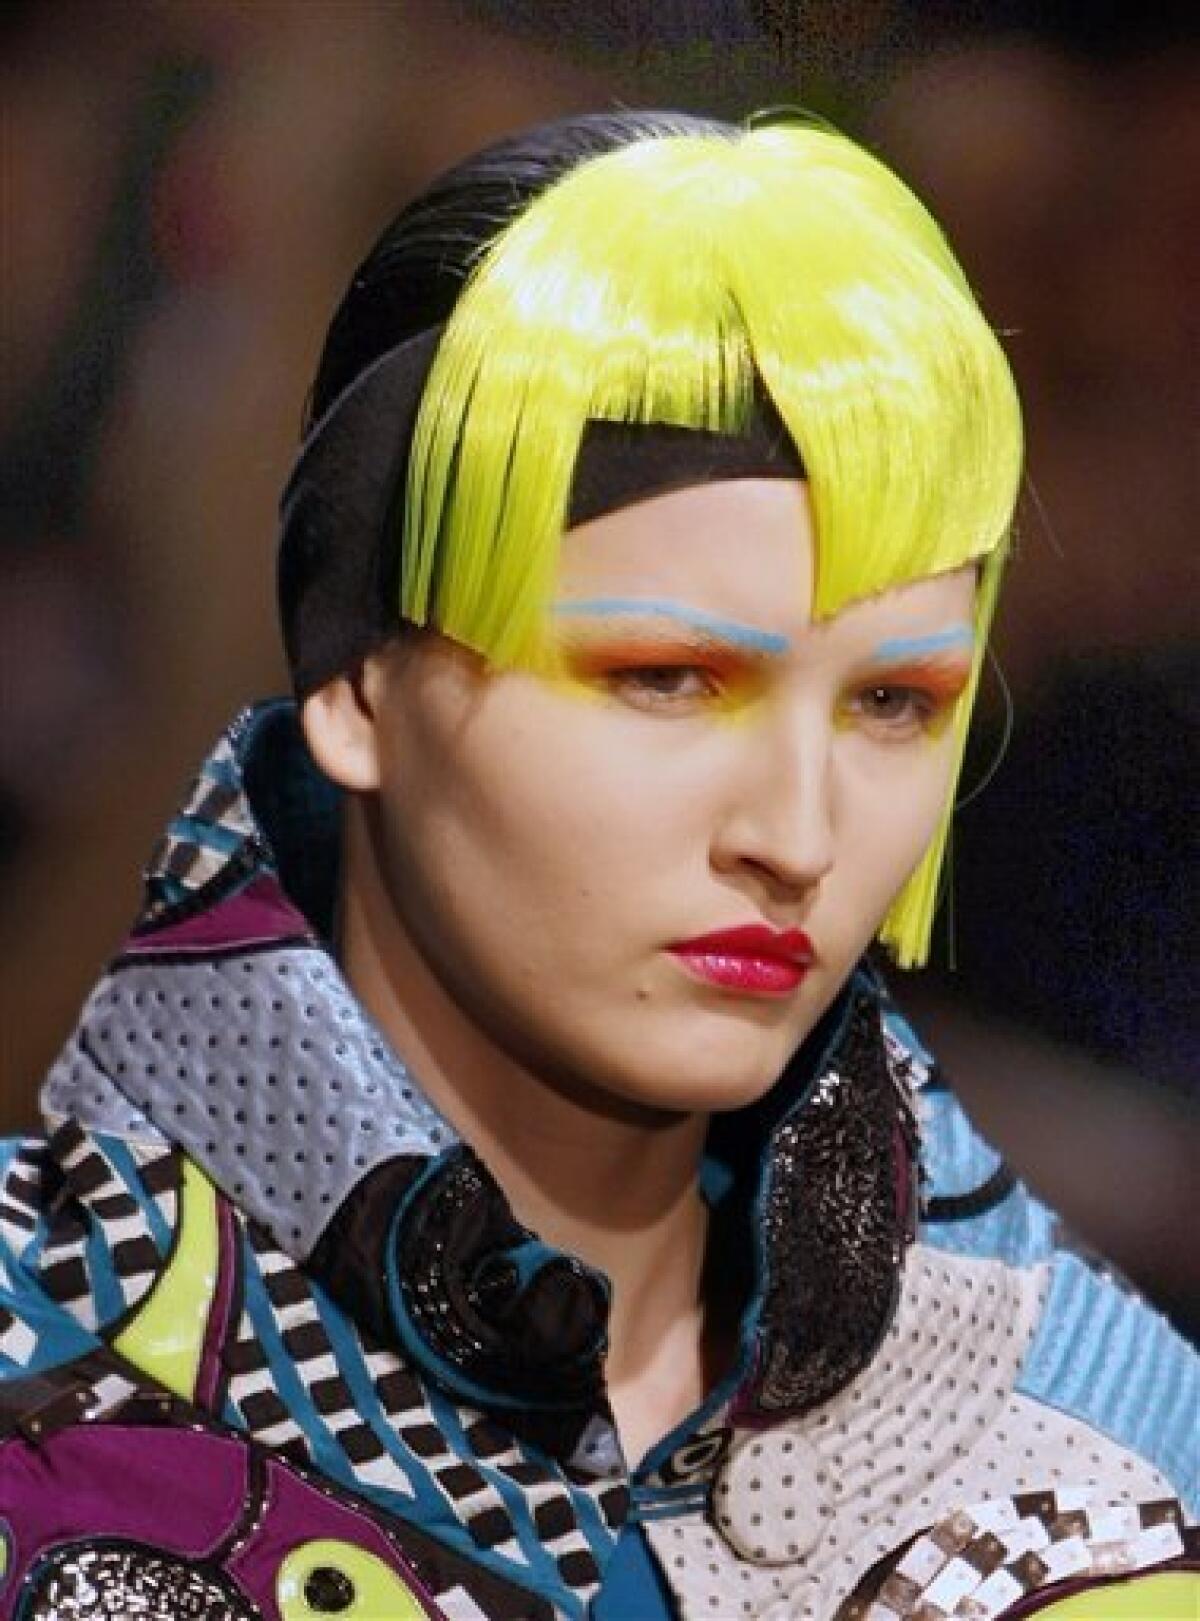 A model wears a creation by Indian fashion designer Manish Arora as part of his Fall-Winter 2010-2011 ready-to-wear collection presented in Paris, Thursday March 4, 2010. (AP Photo/Remy de la Mauviniere)